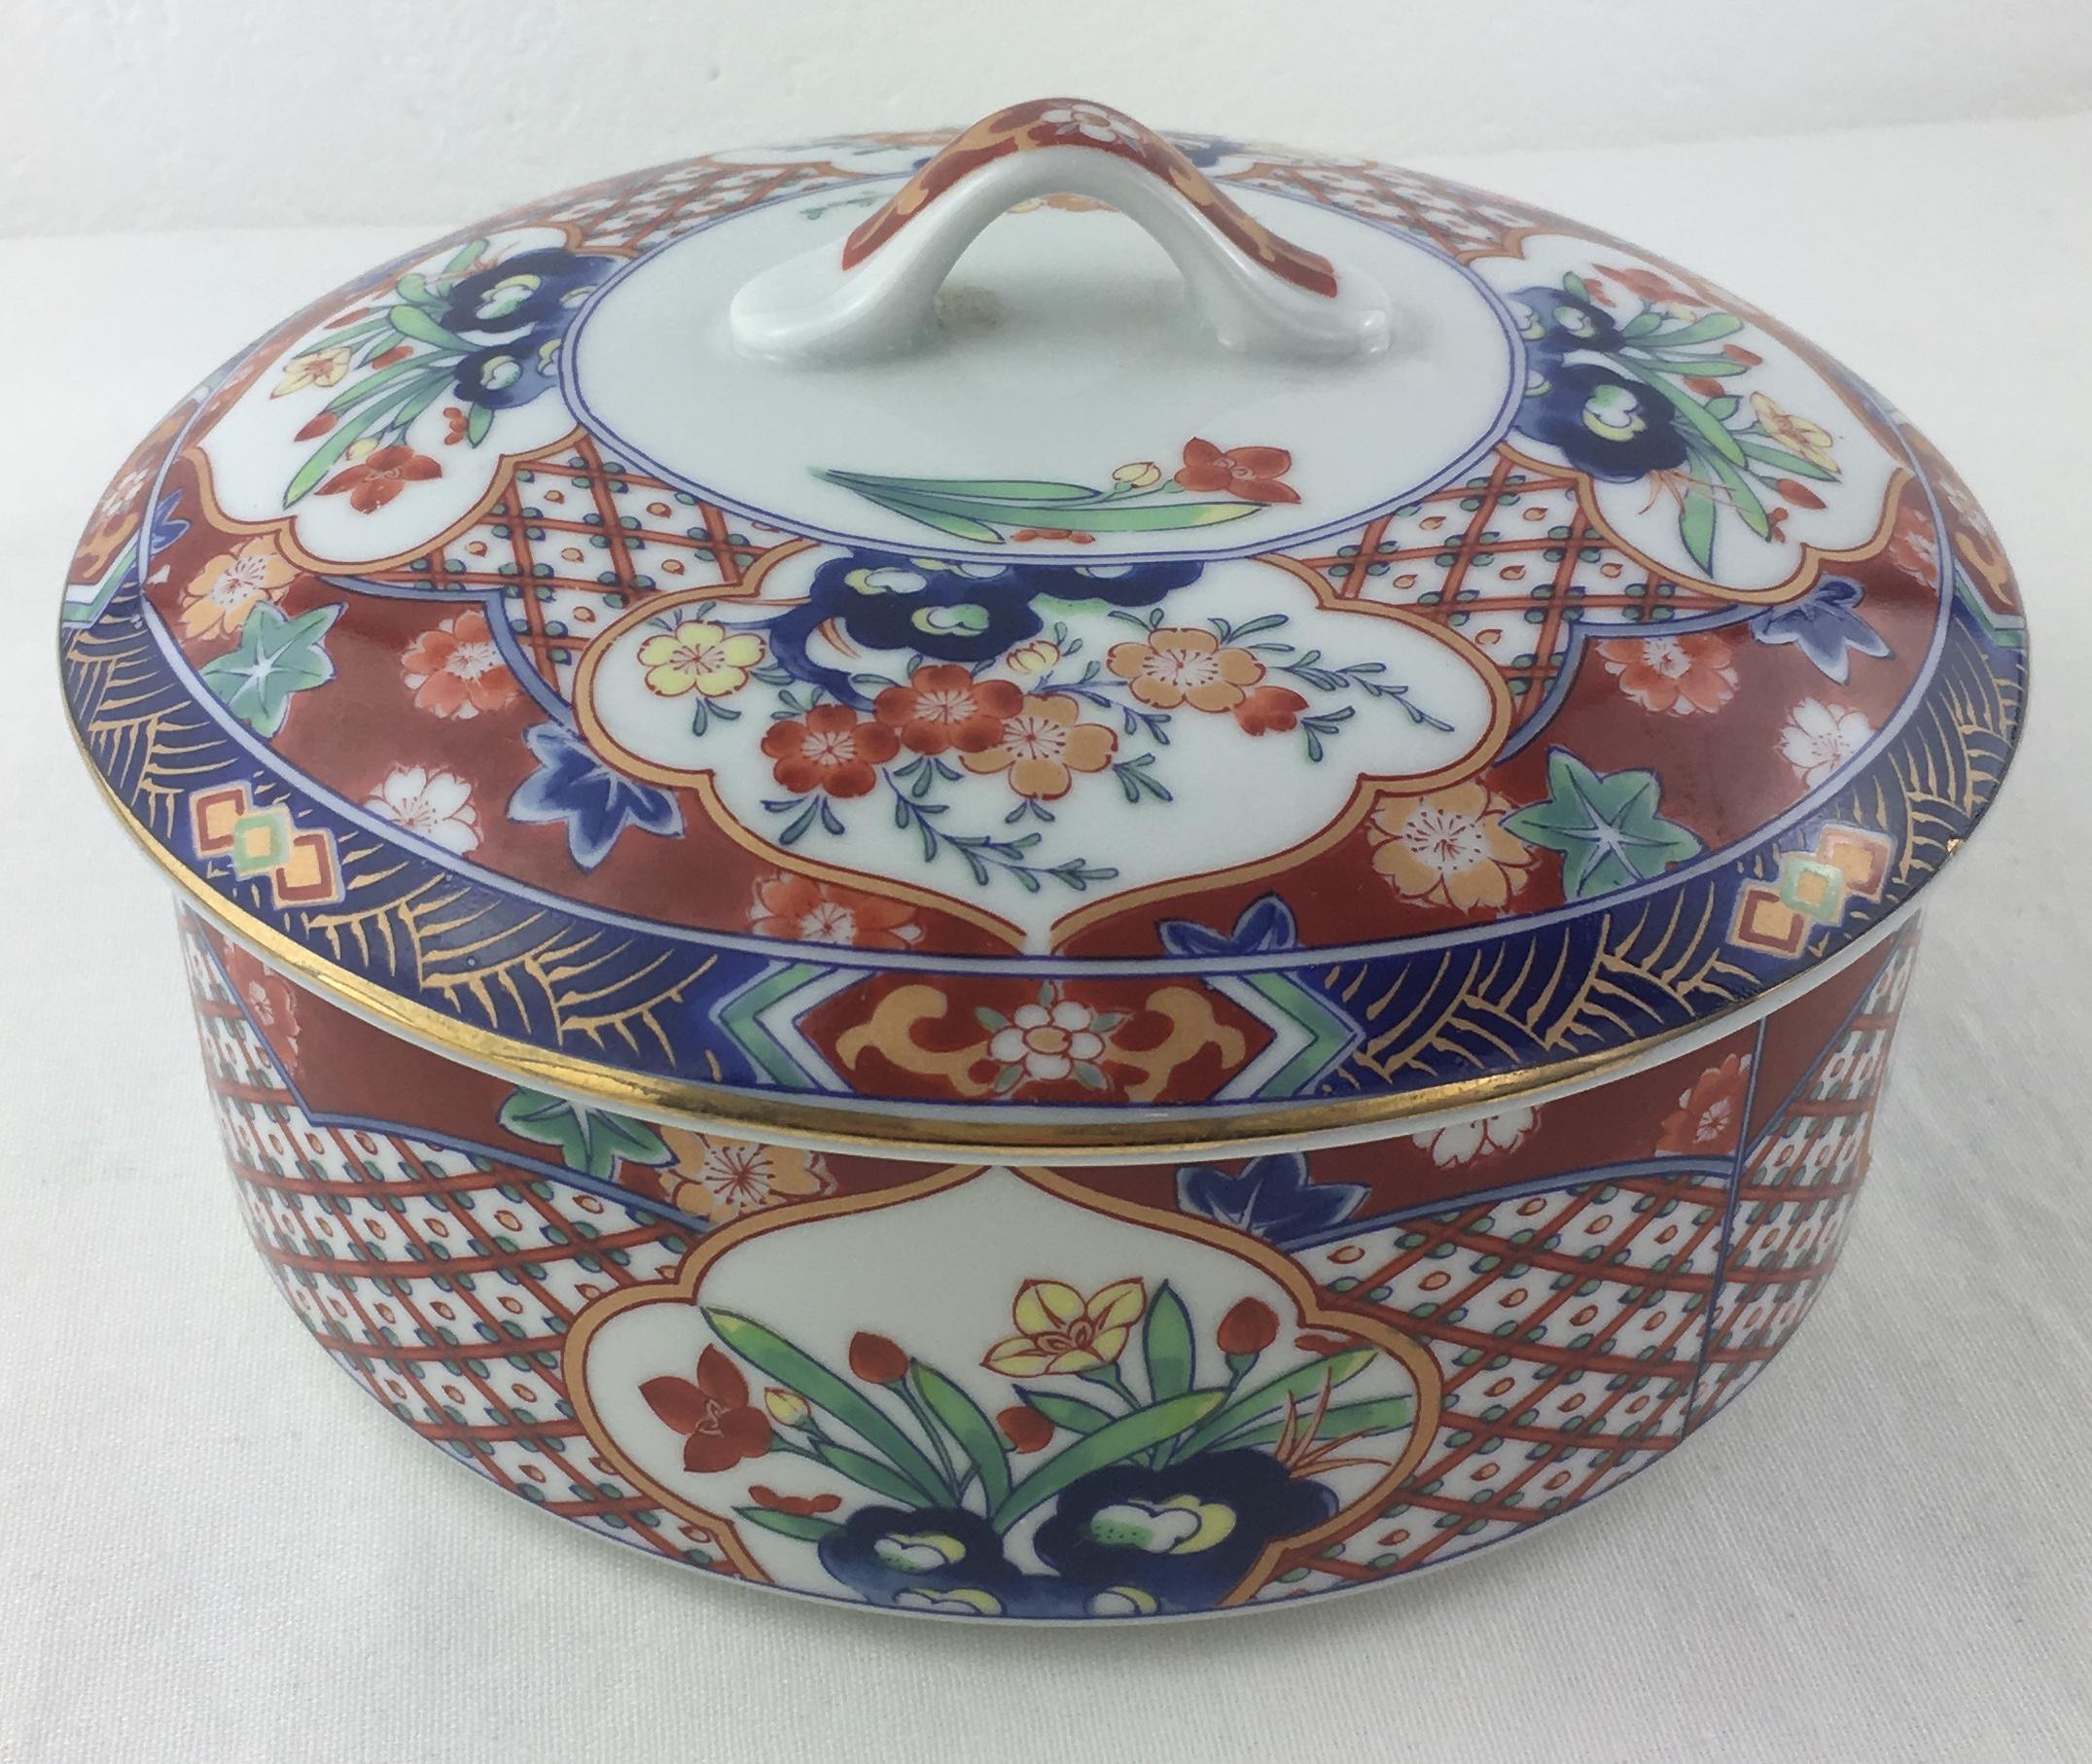 Beautiful Japanese hand painted porcelain decorative trinket, pill or jewelry box or serving dish of Meiji period. 

The decoration consists of under-glaze cobalt blue deep borders near the rim, hand painted in the Kakiemon style with over-glaze